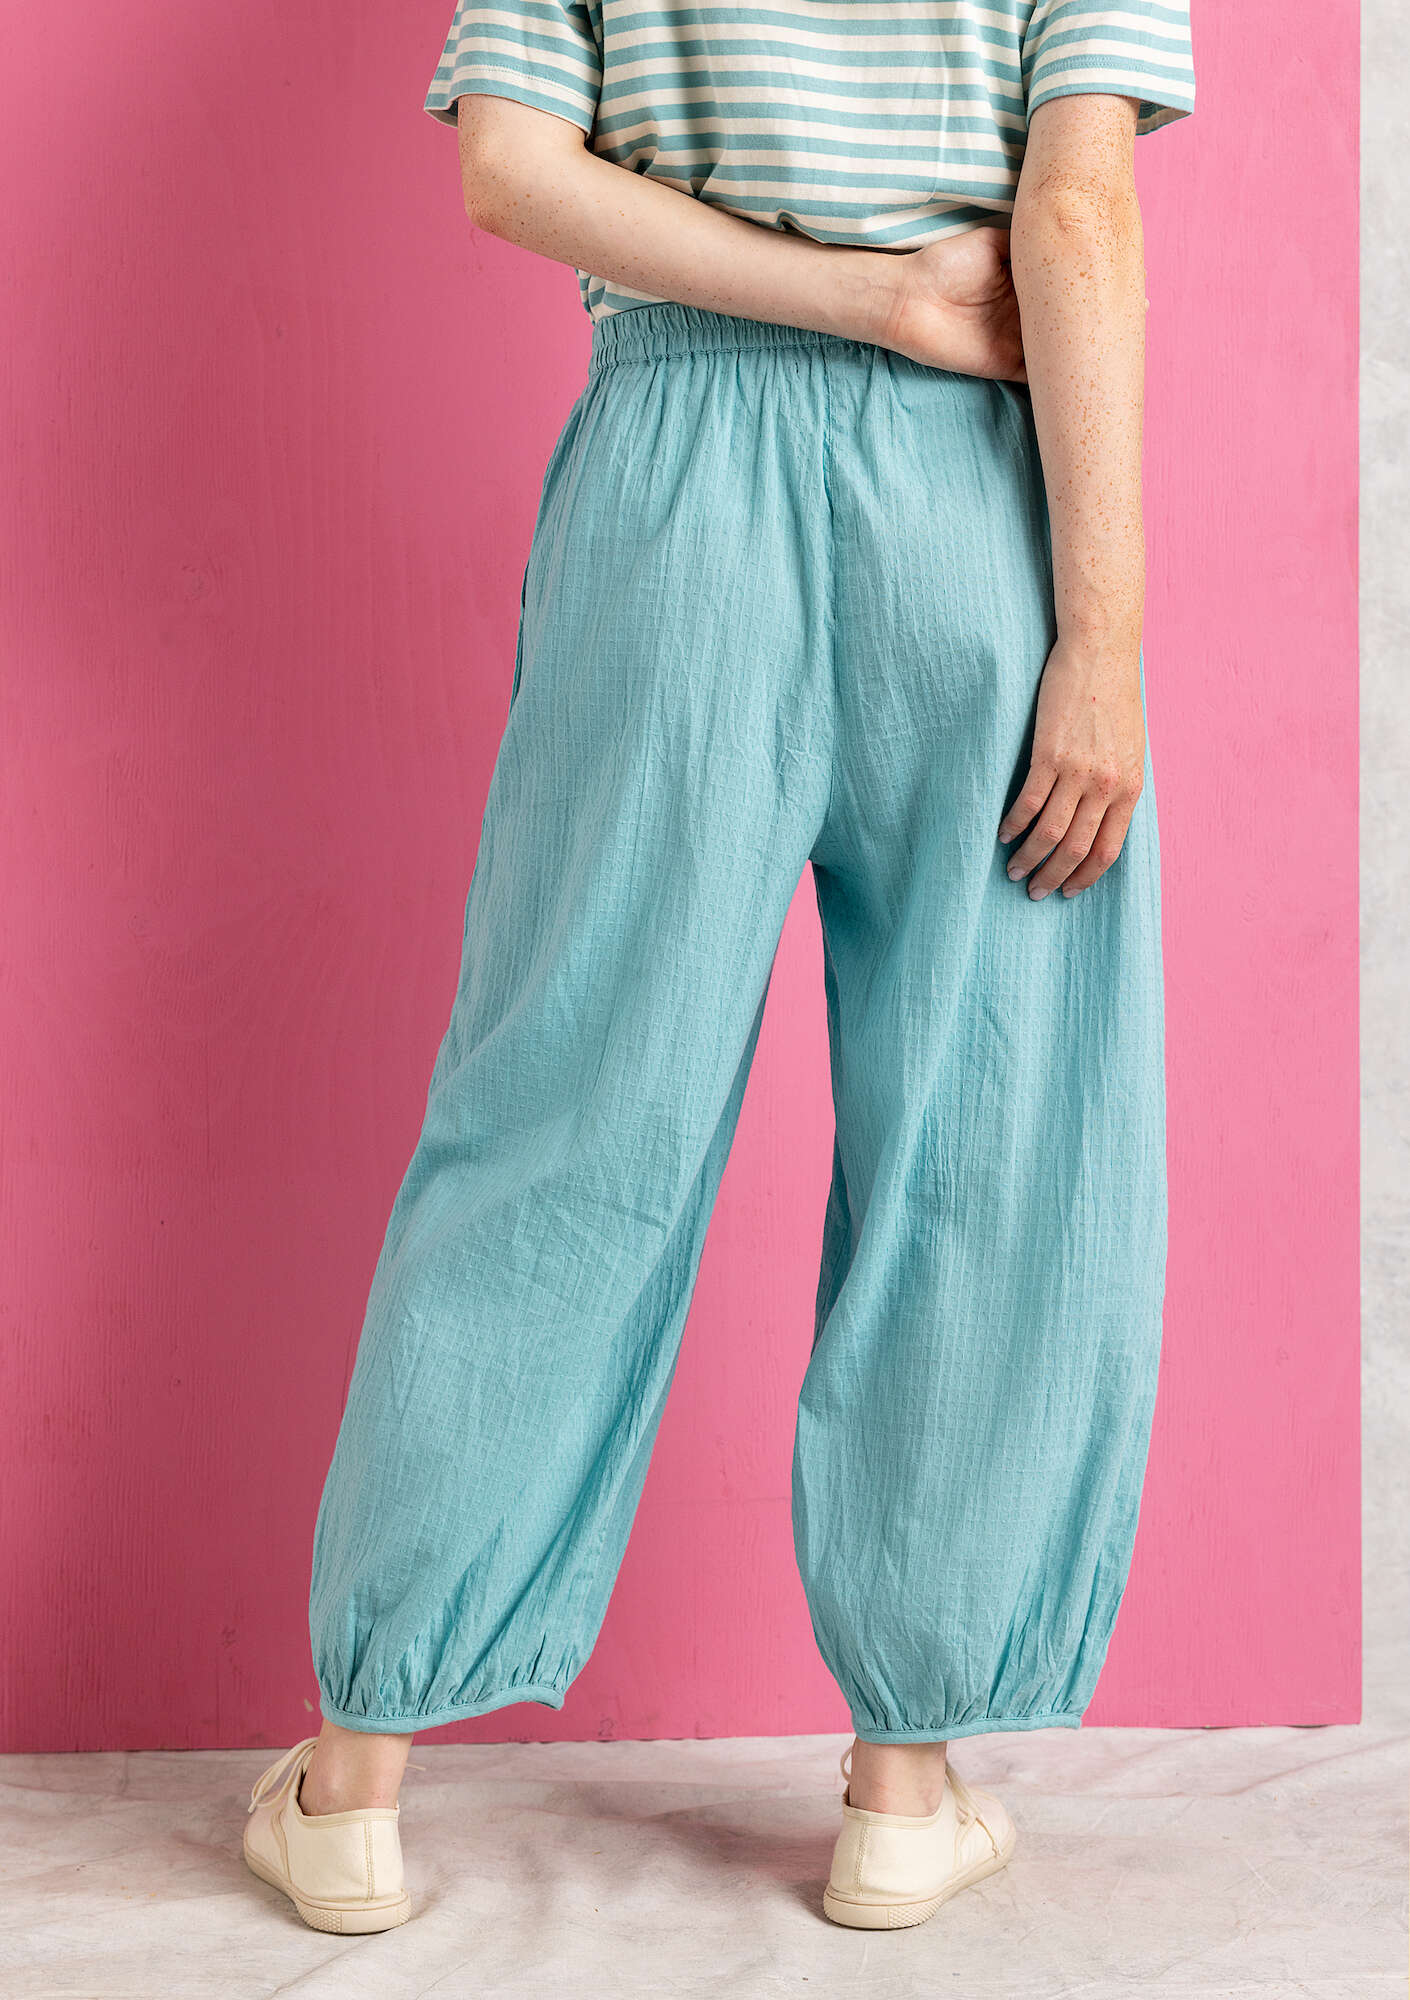 “Hilda” harem trousers in an organic cotton weave meadow stream thumbnail